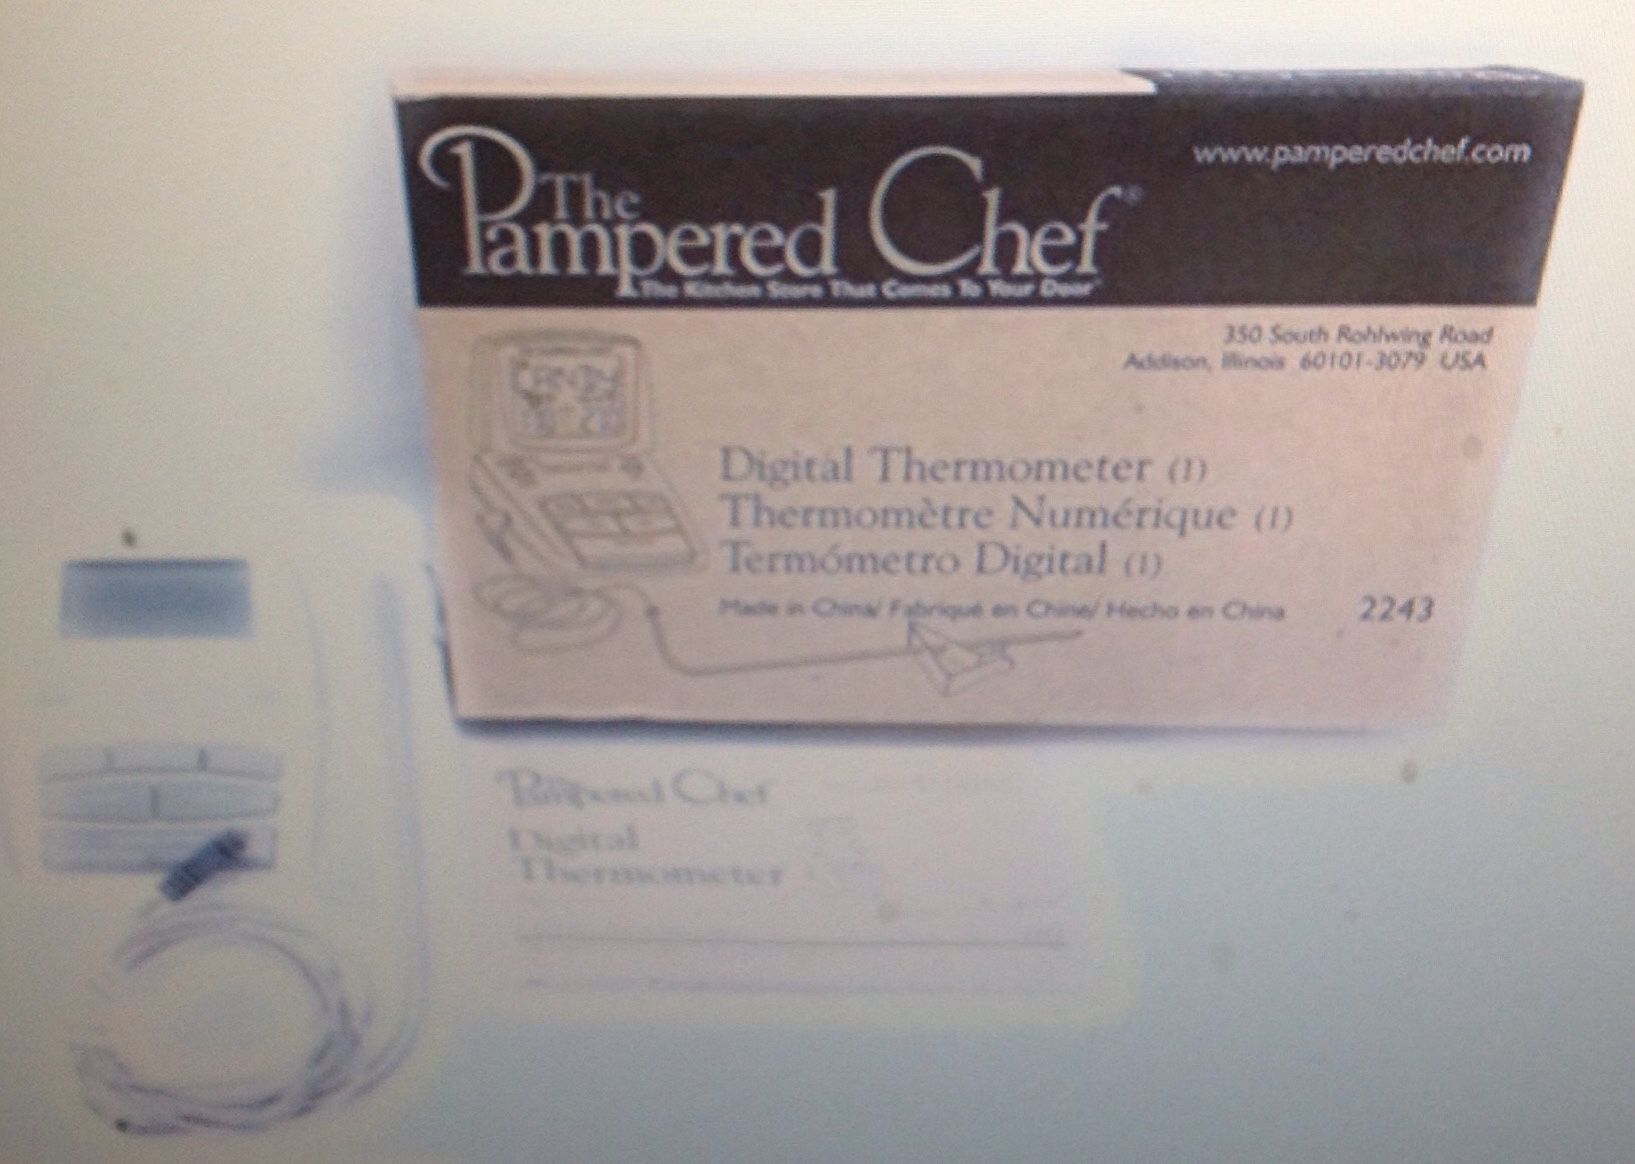 Pampered chef digital thermometer